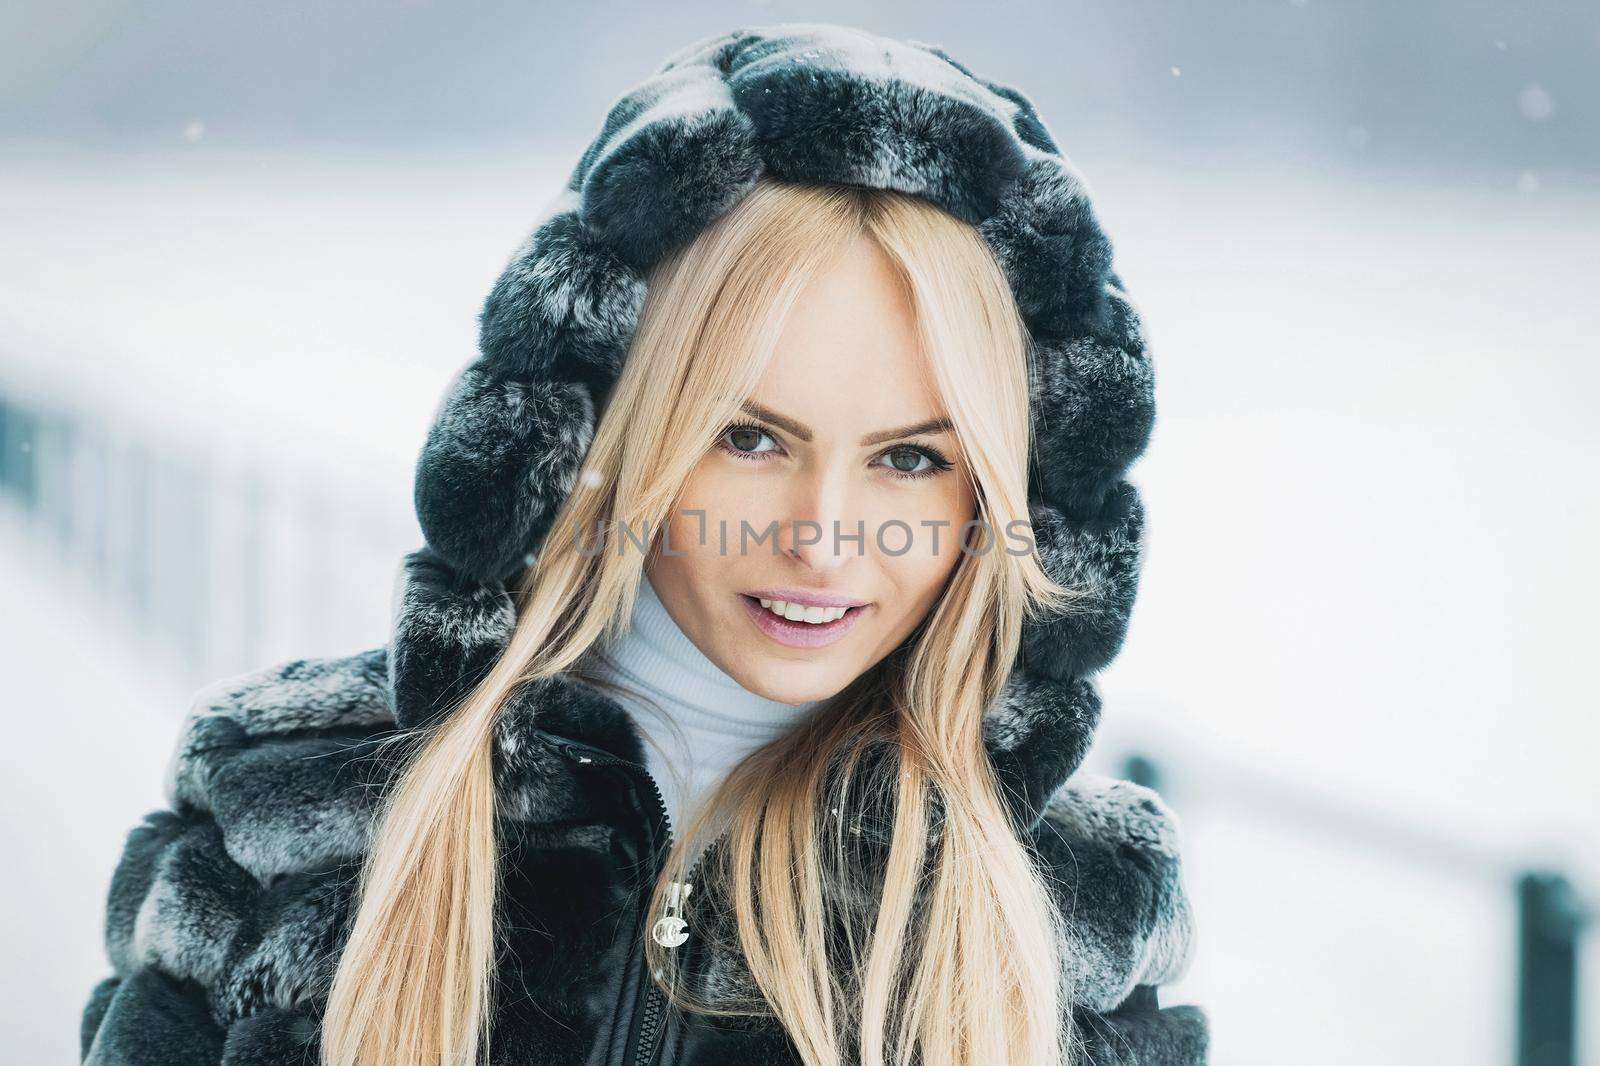 Girl on winter day. Woman Model in fur on snowy nature.